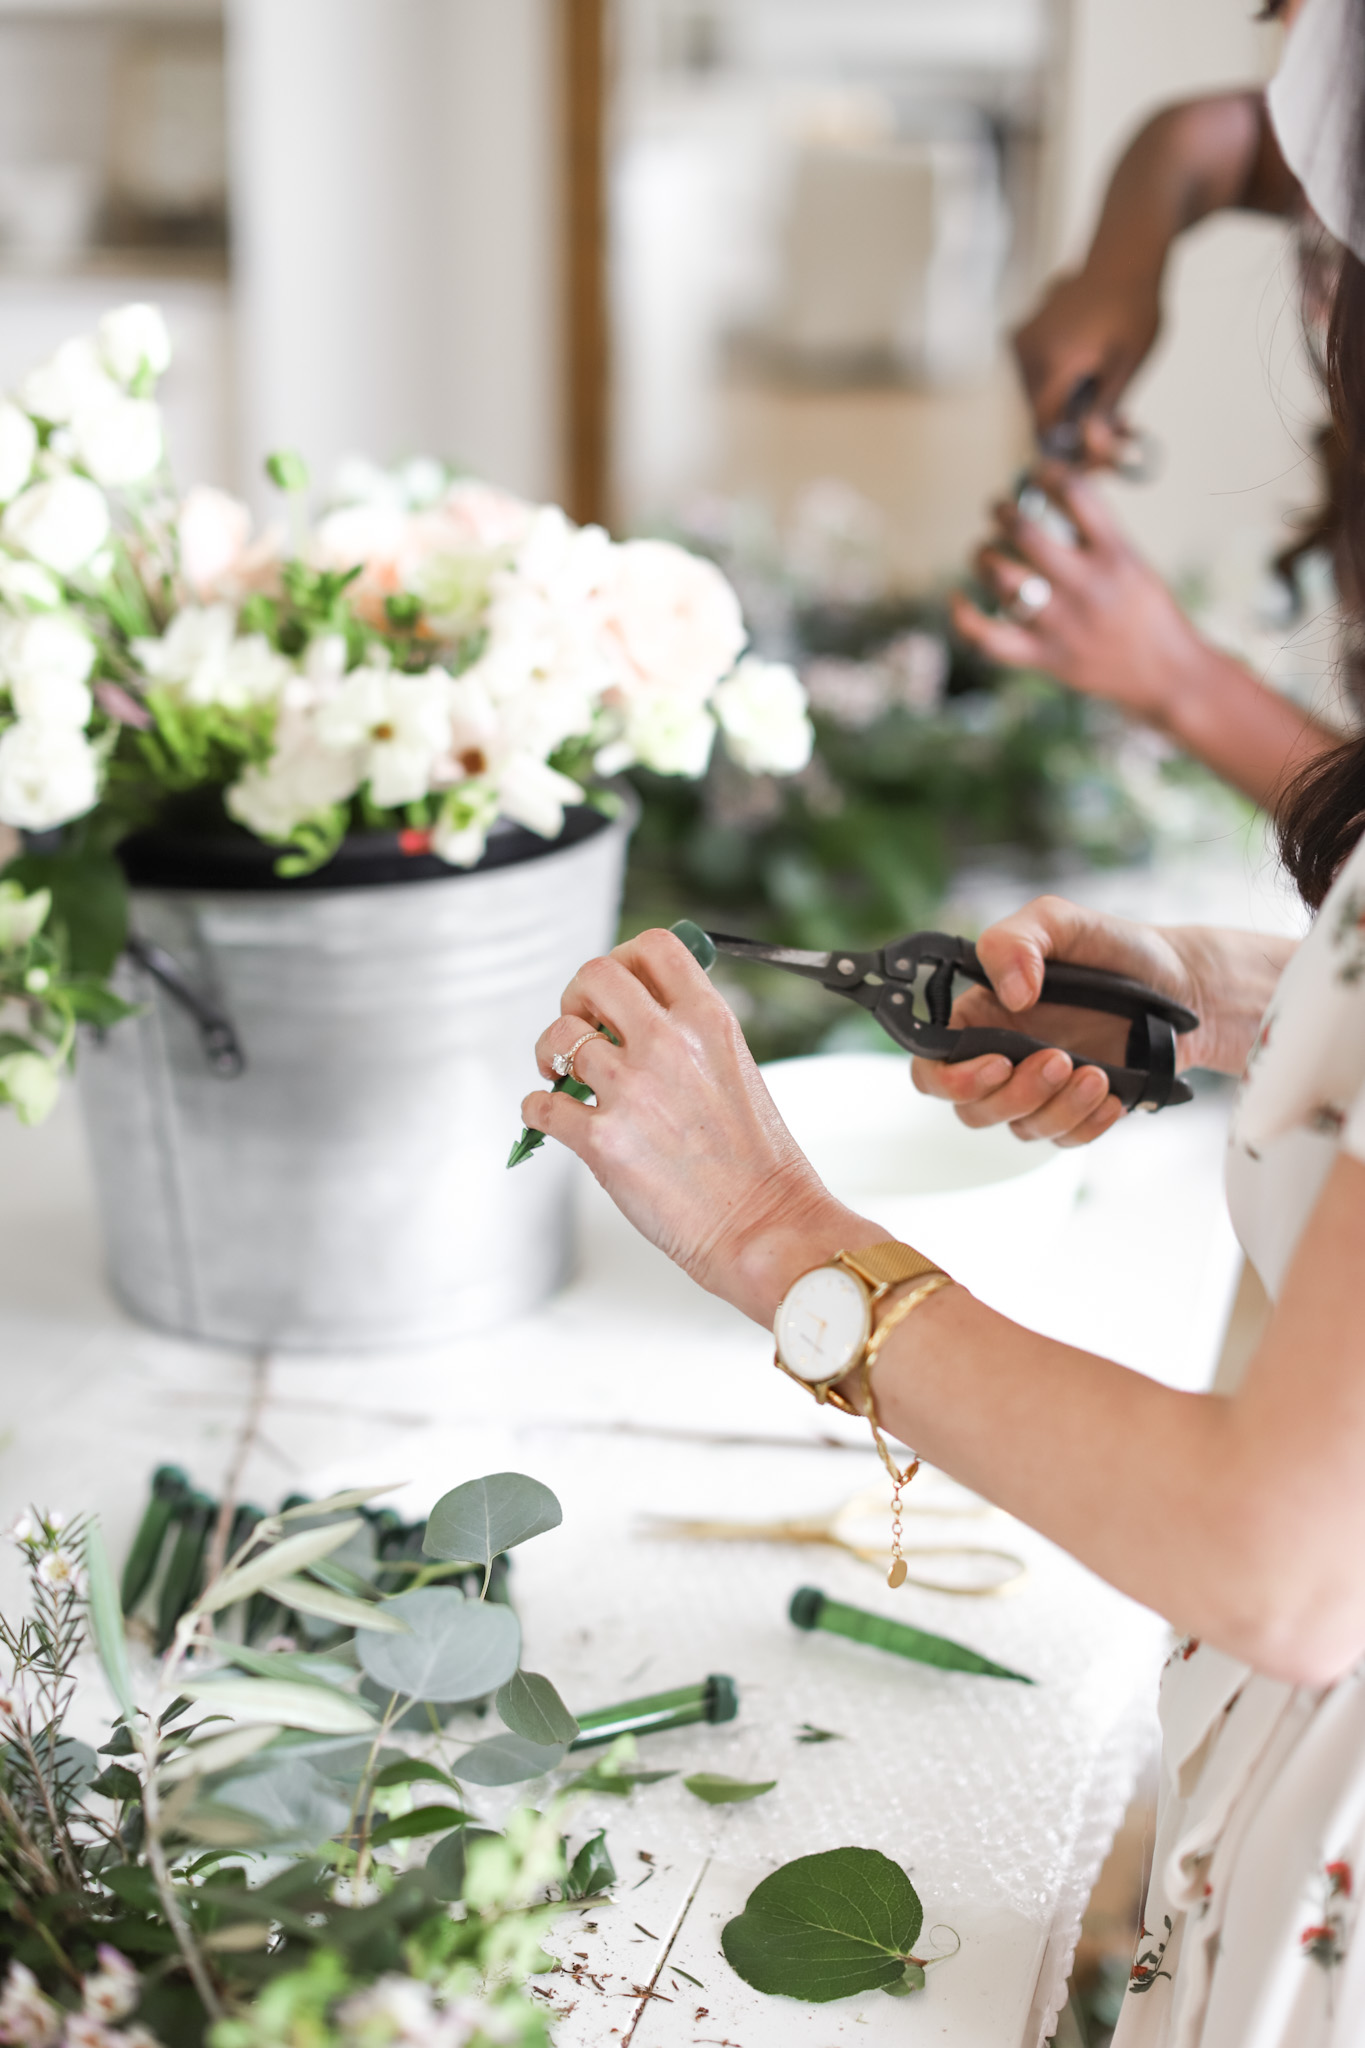 hands using a floral tube for a fresh flower wreath